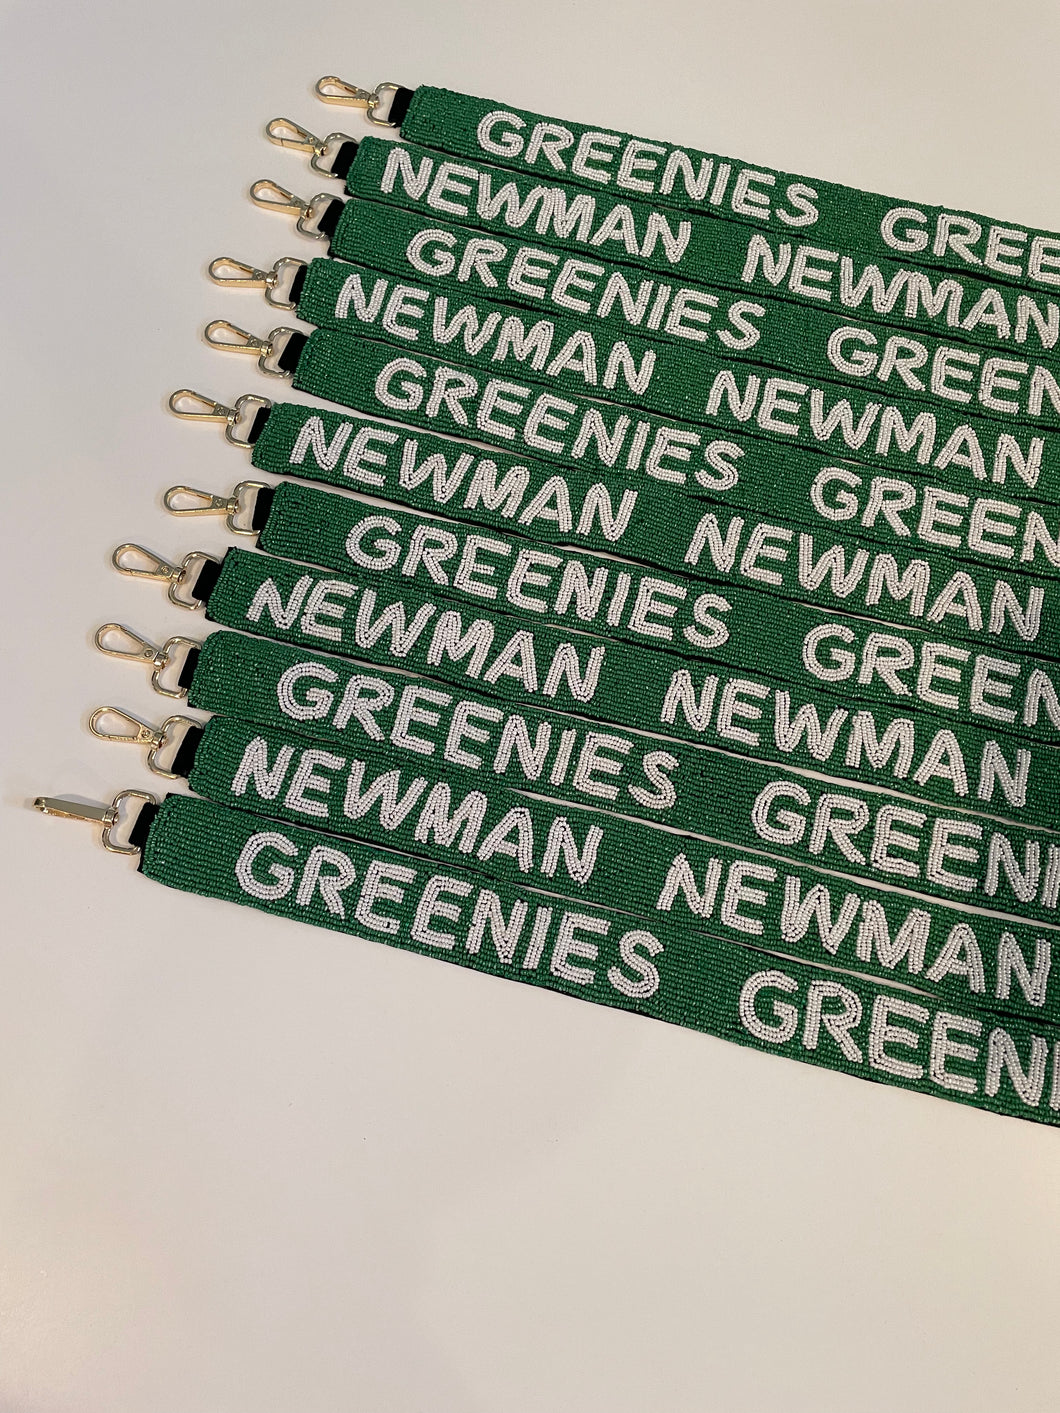 NEWMAN and GREENIES beaded purse strap